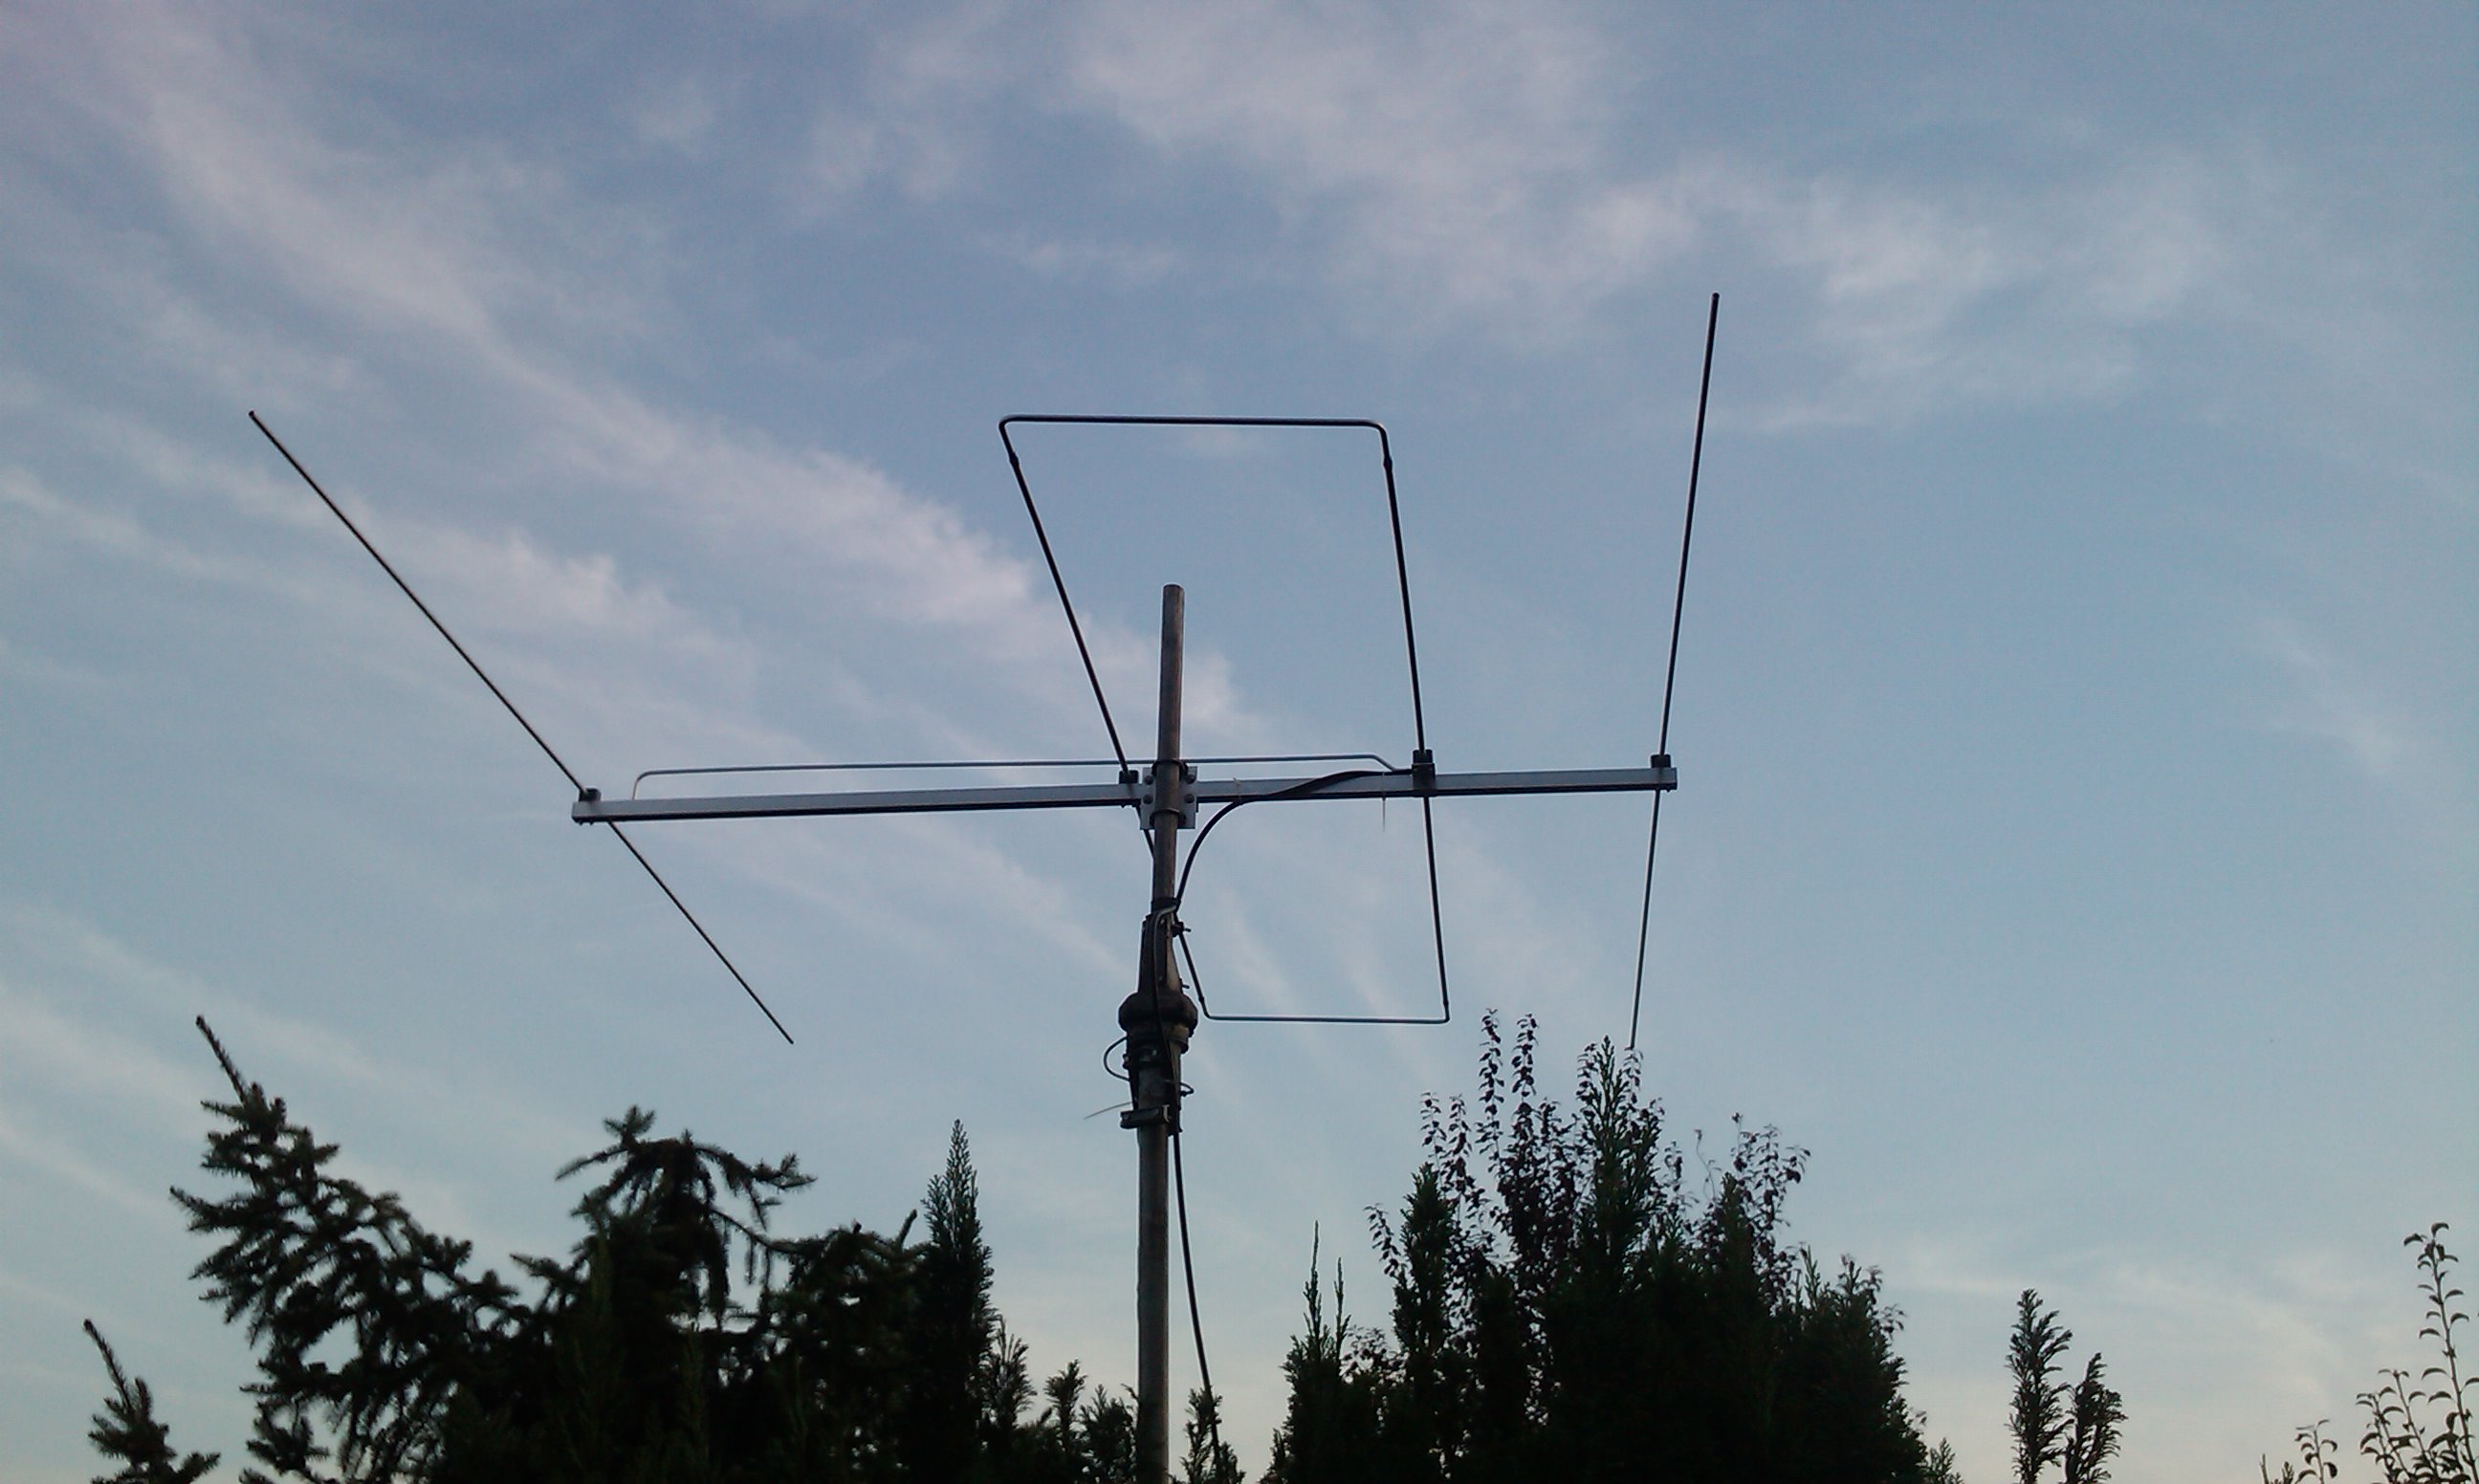 New 3el LFA-50MHz yagi antenna ready and placed on top of my telescopic ant...